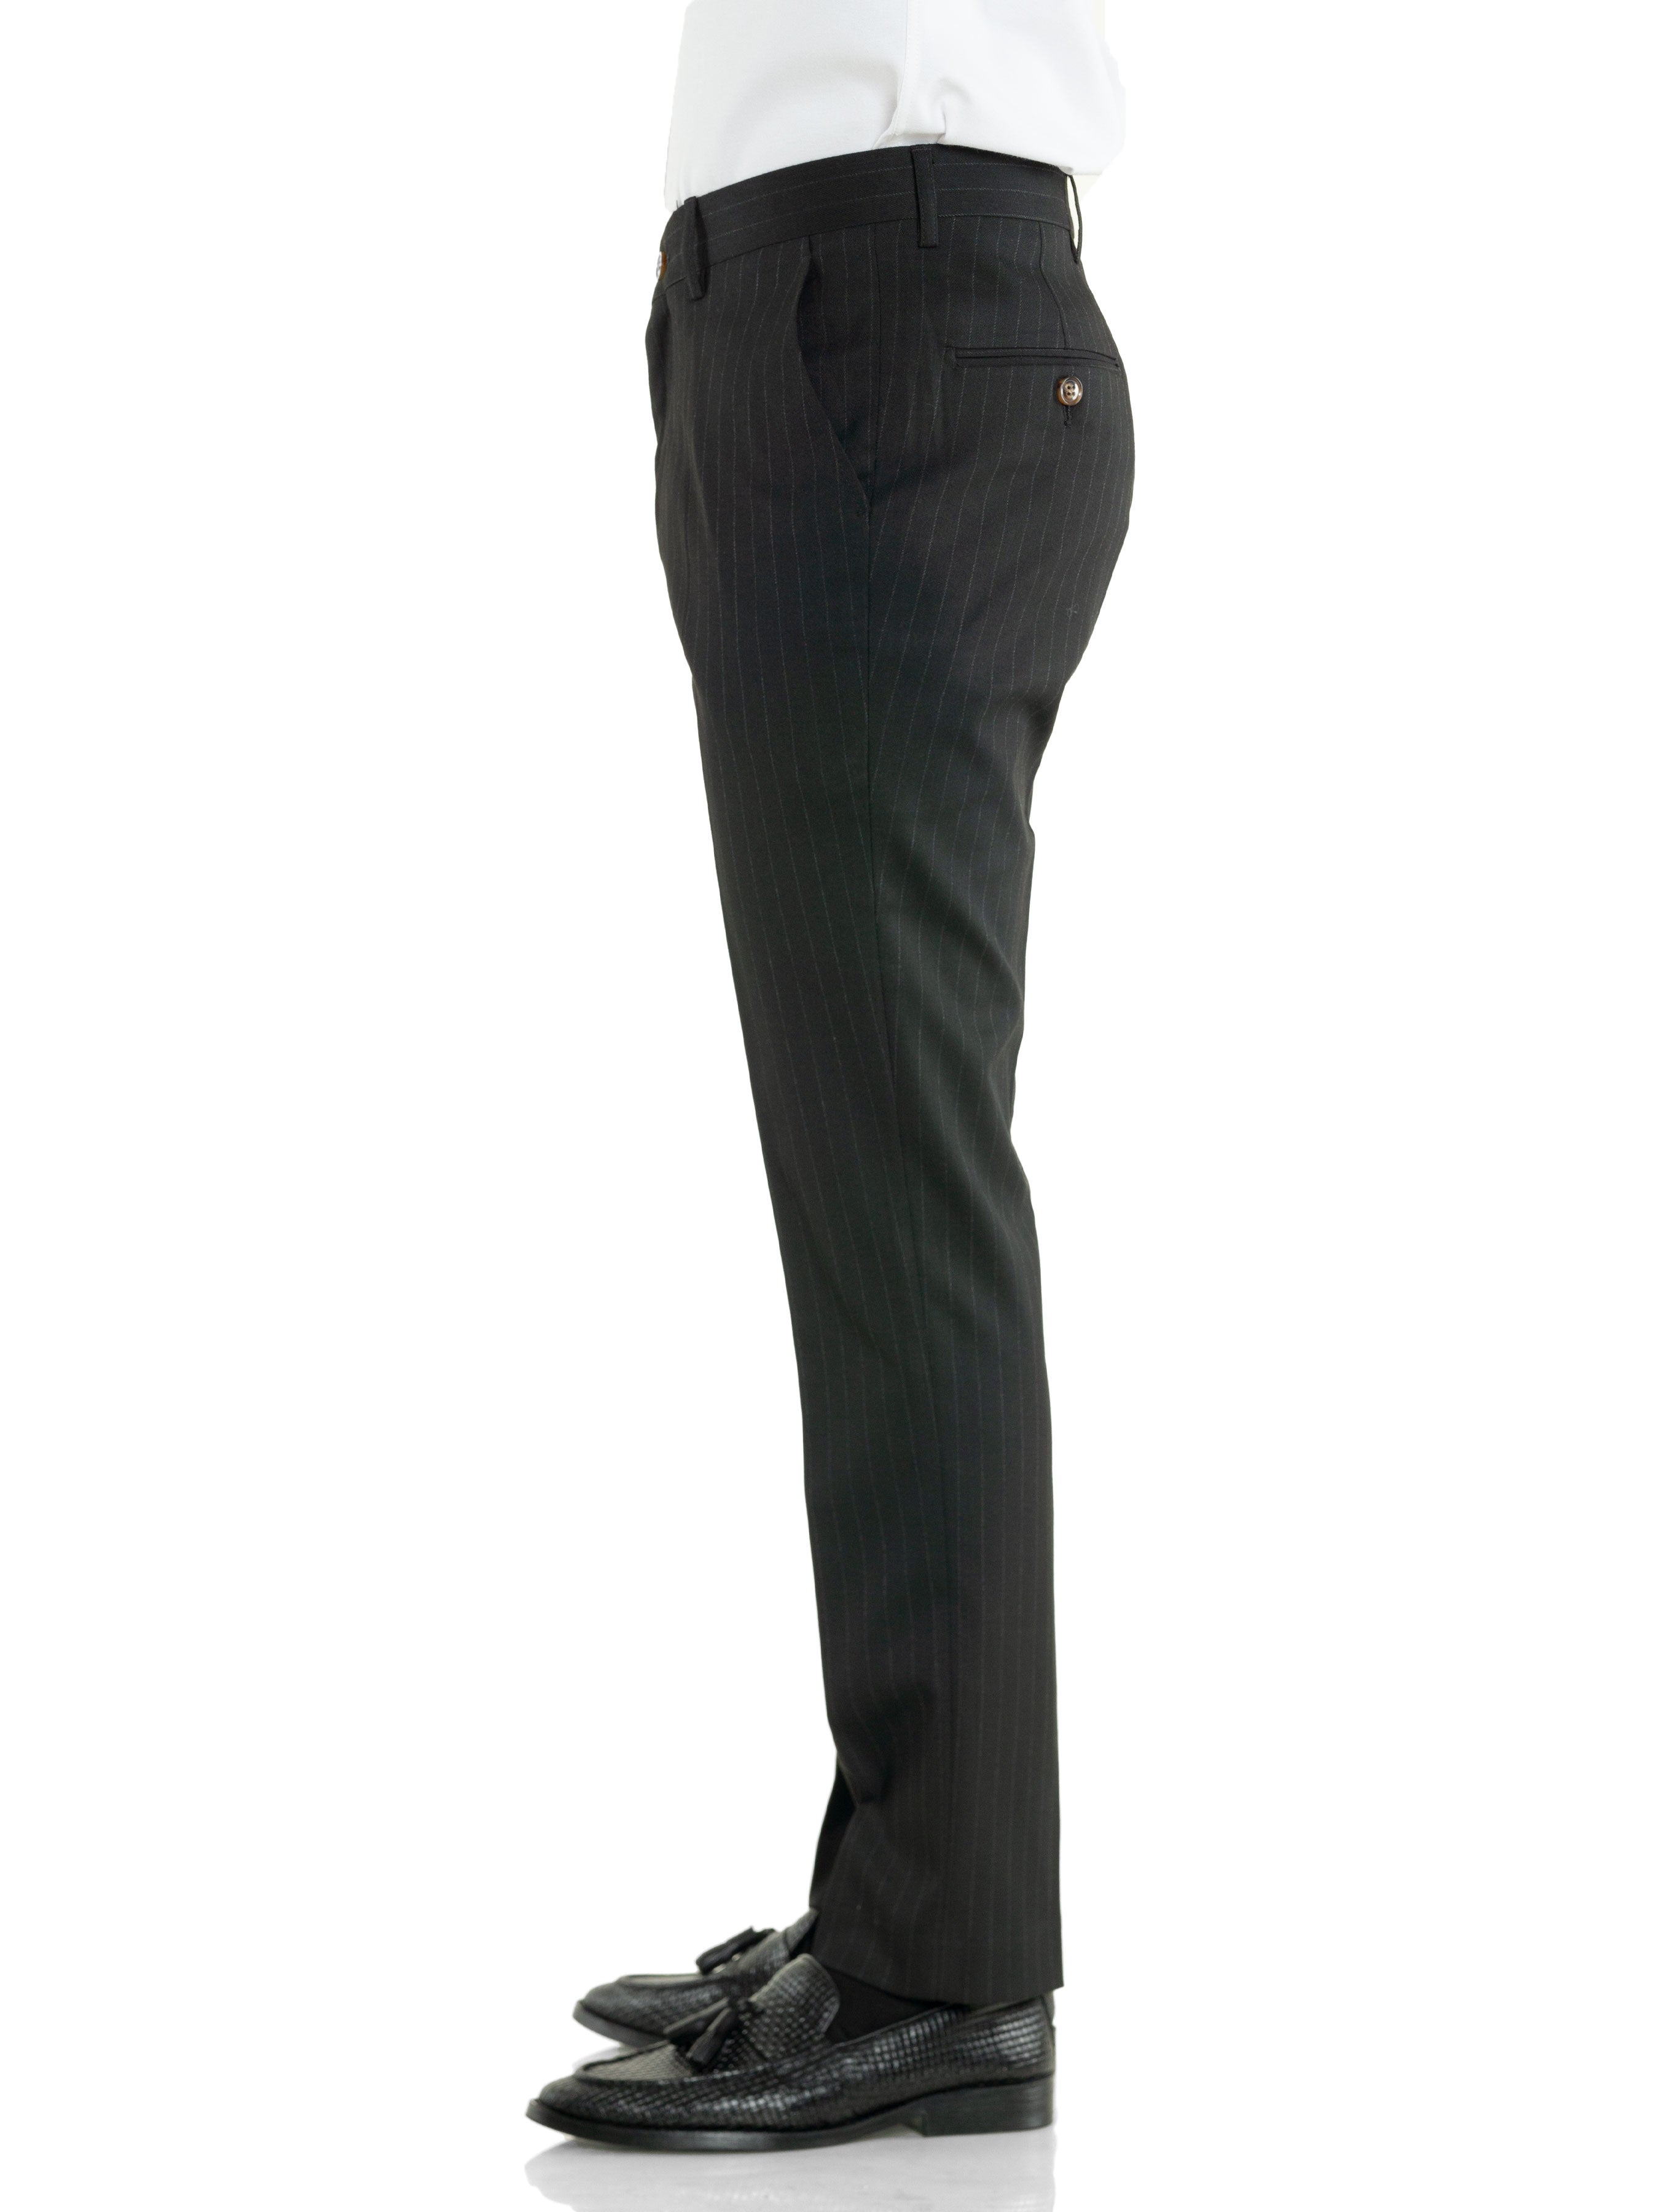 Trousers With Belt Loop -  Black Pinstripes (Stretchable) - Zeve Shoes